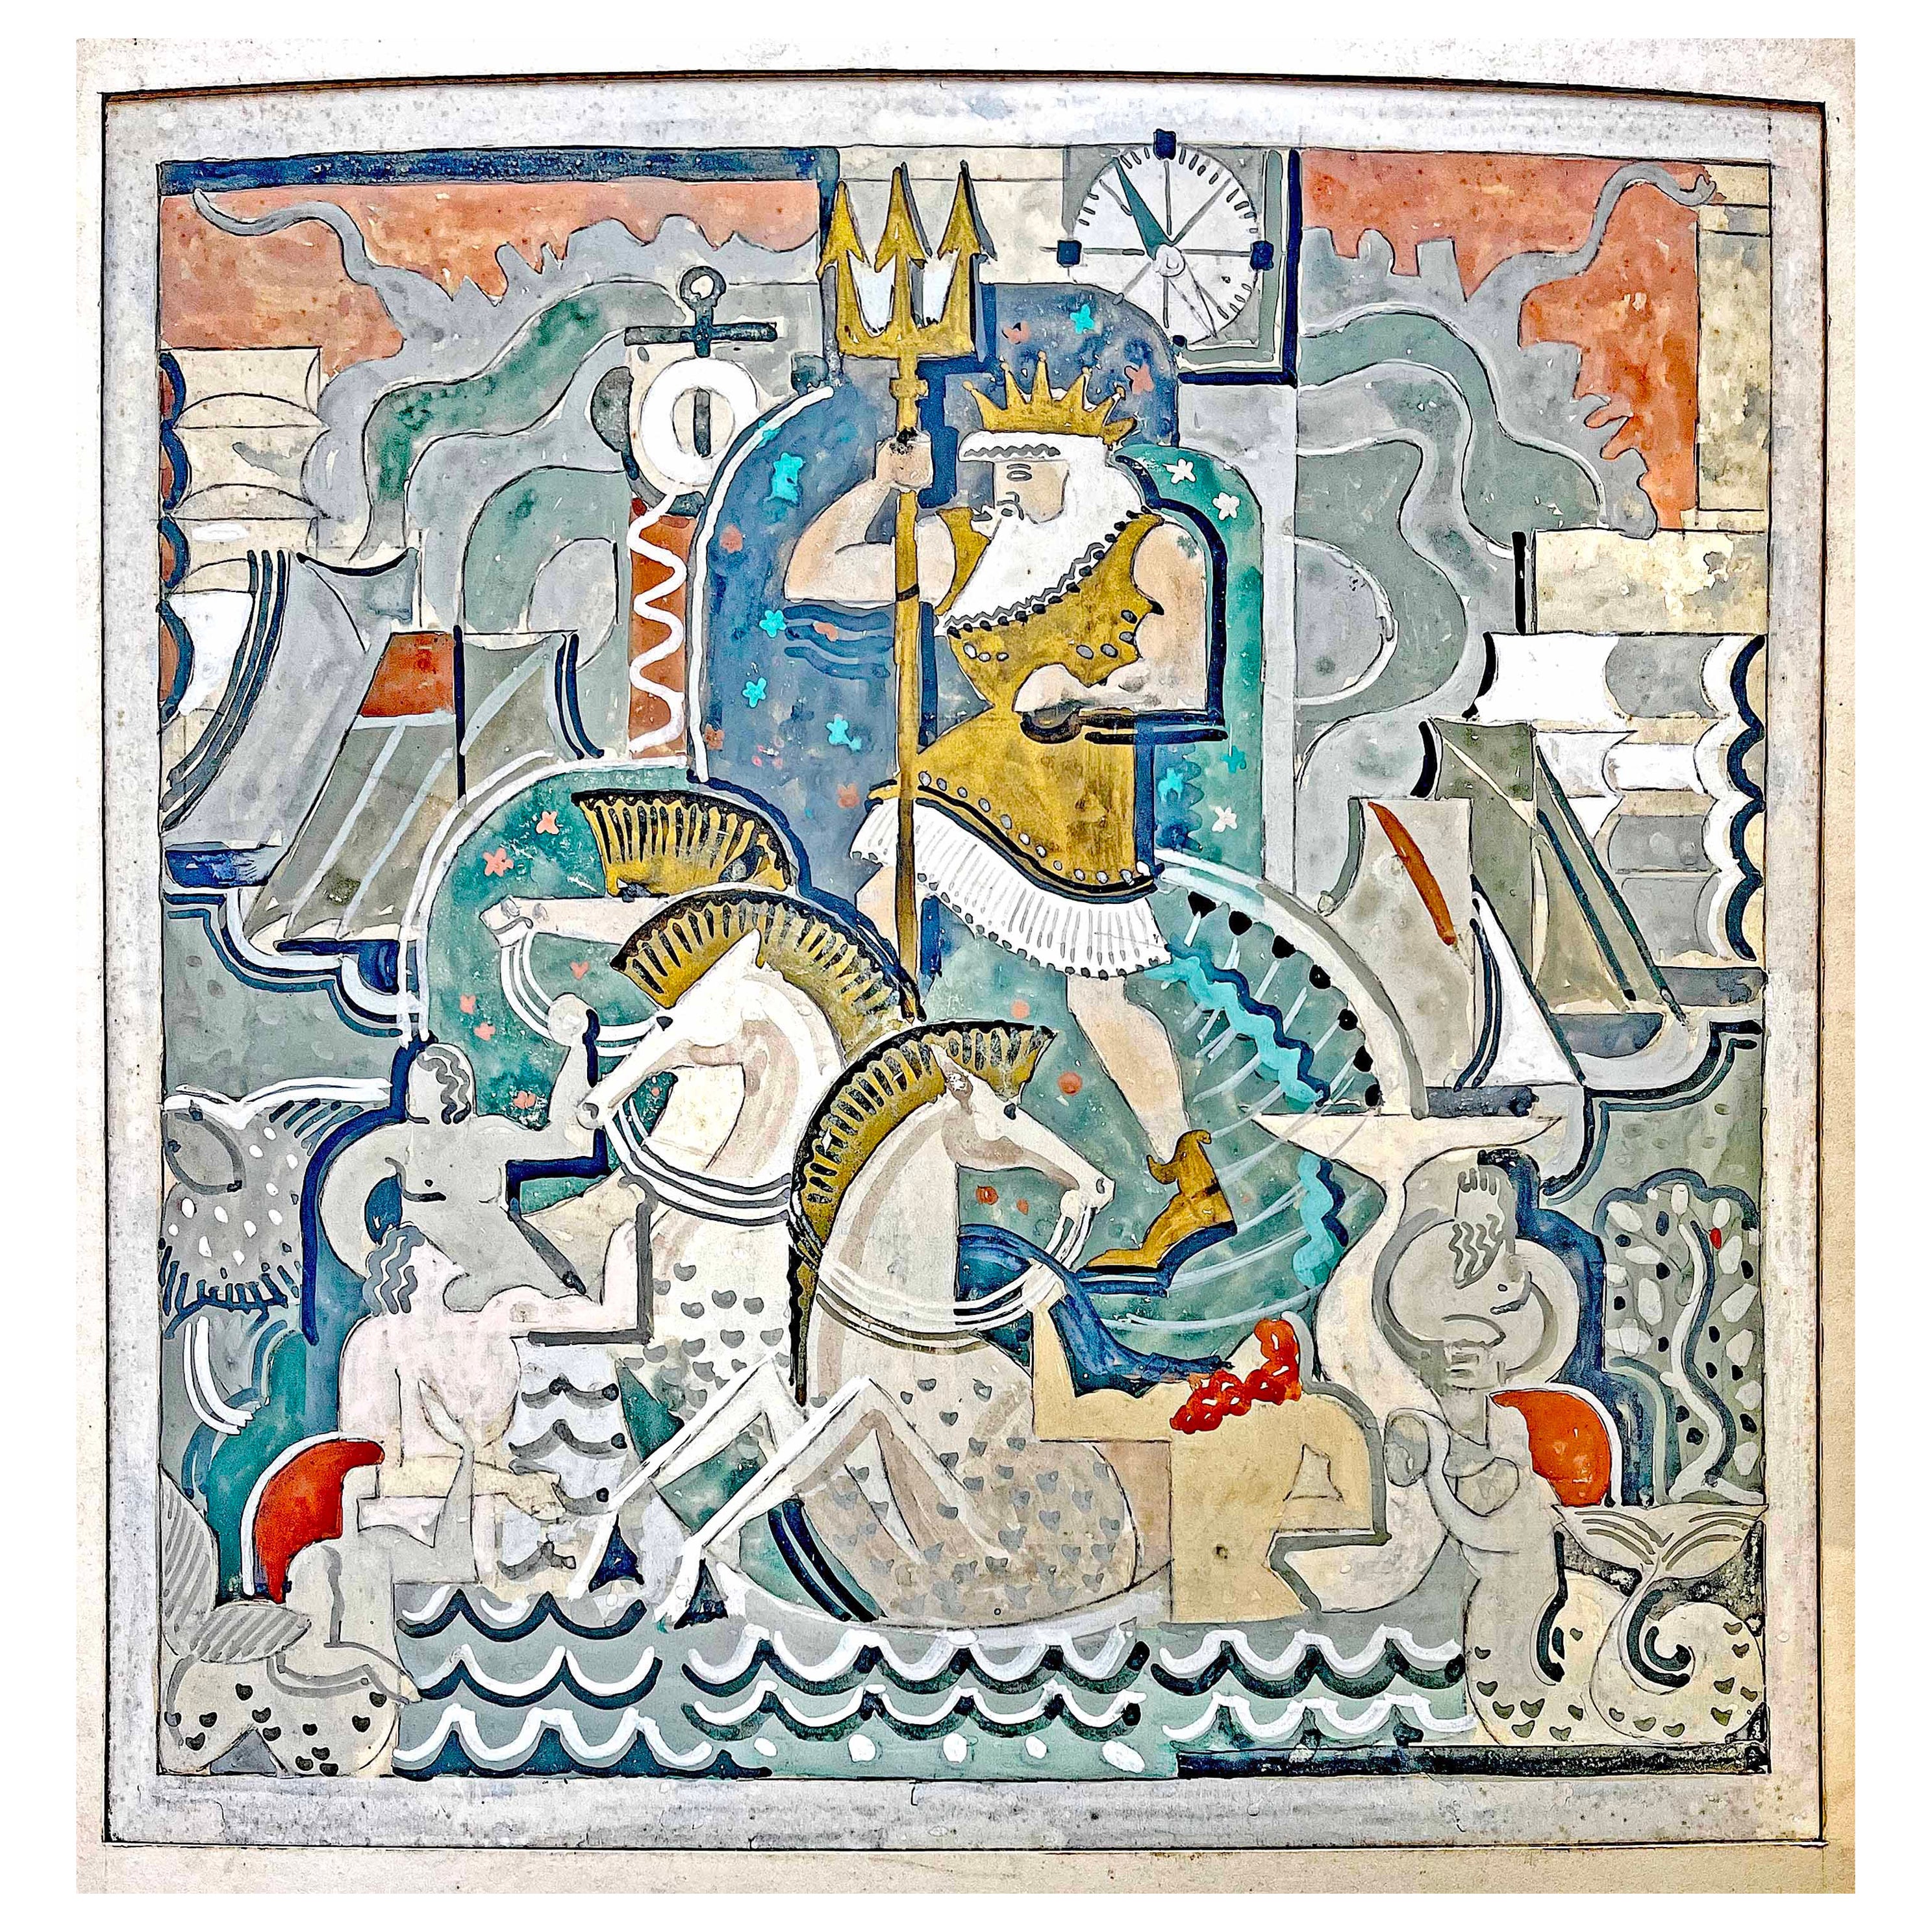 "Neptune's Kingdom", Elaborate Art Deco Painting with Mermaids, Hippocampi For Sale